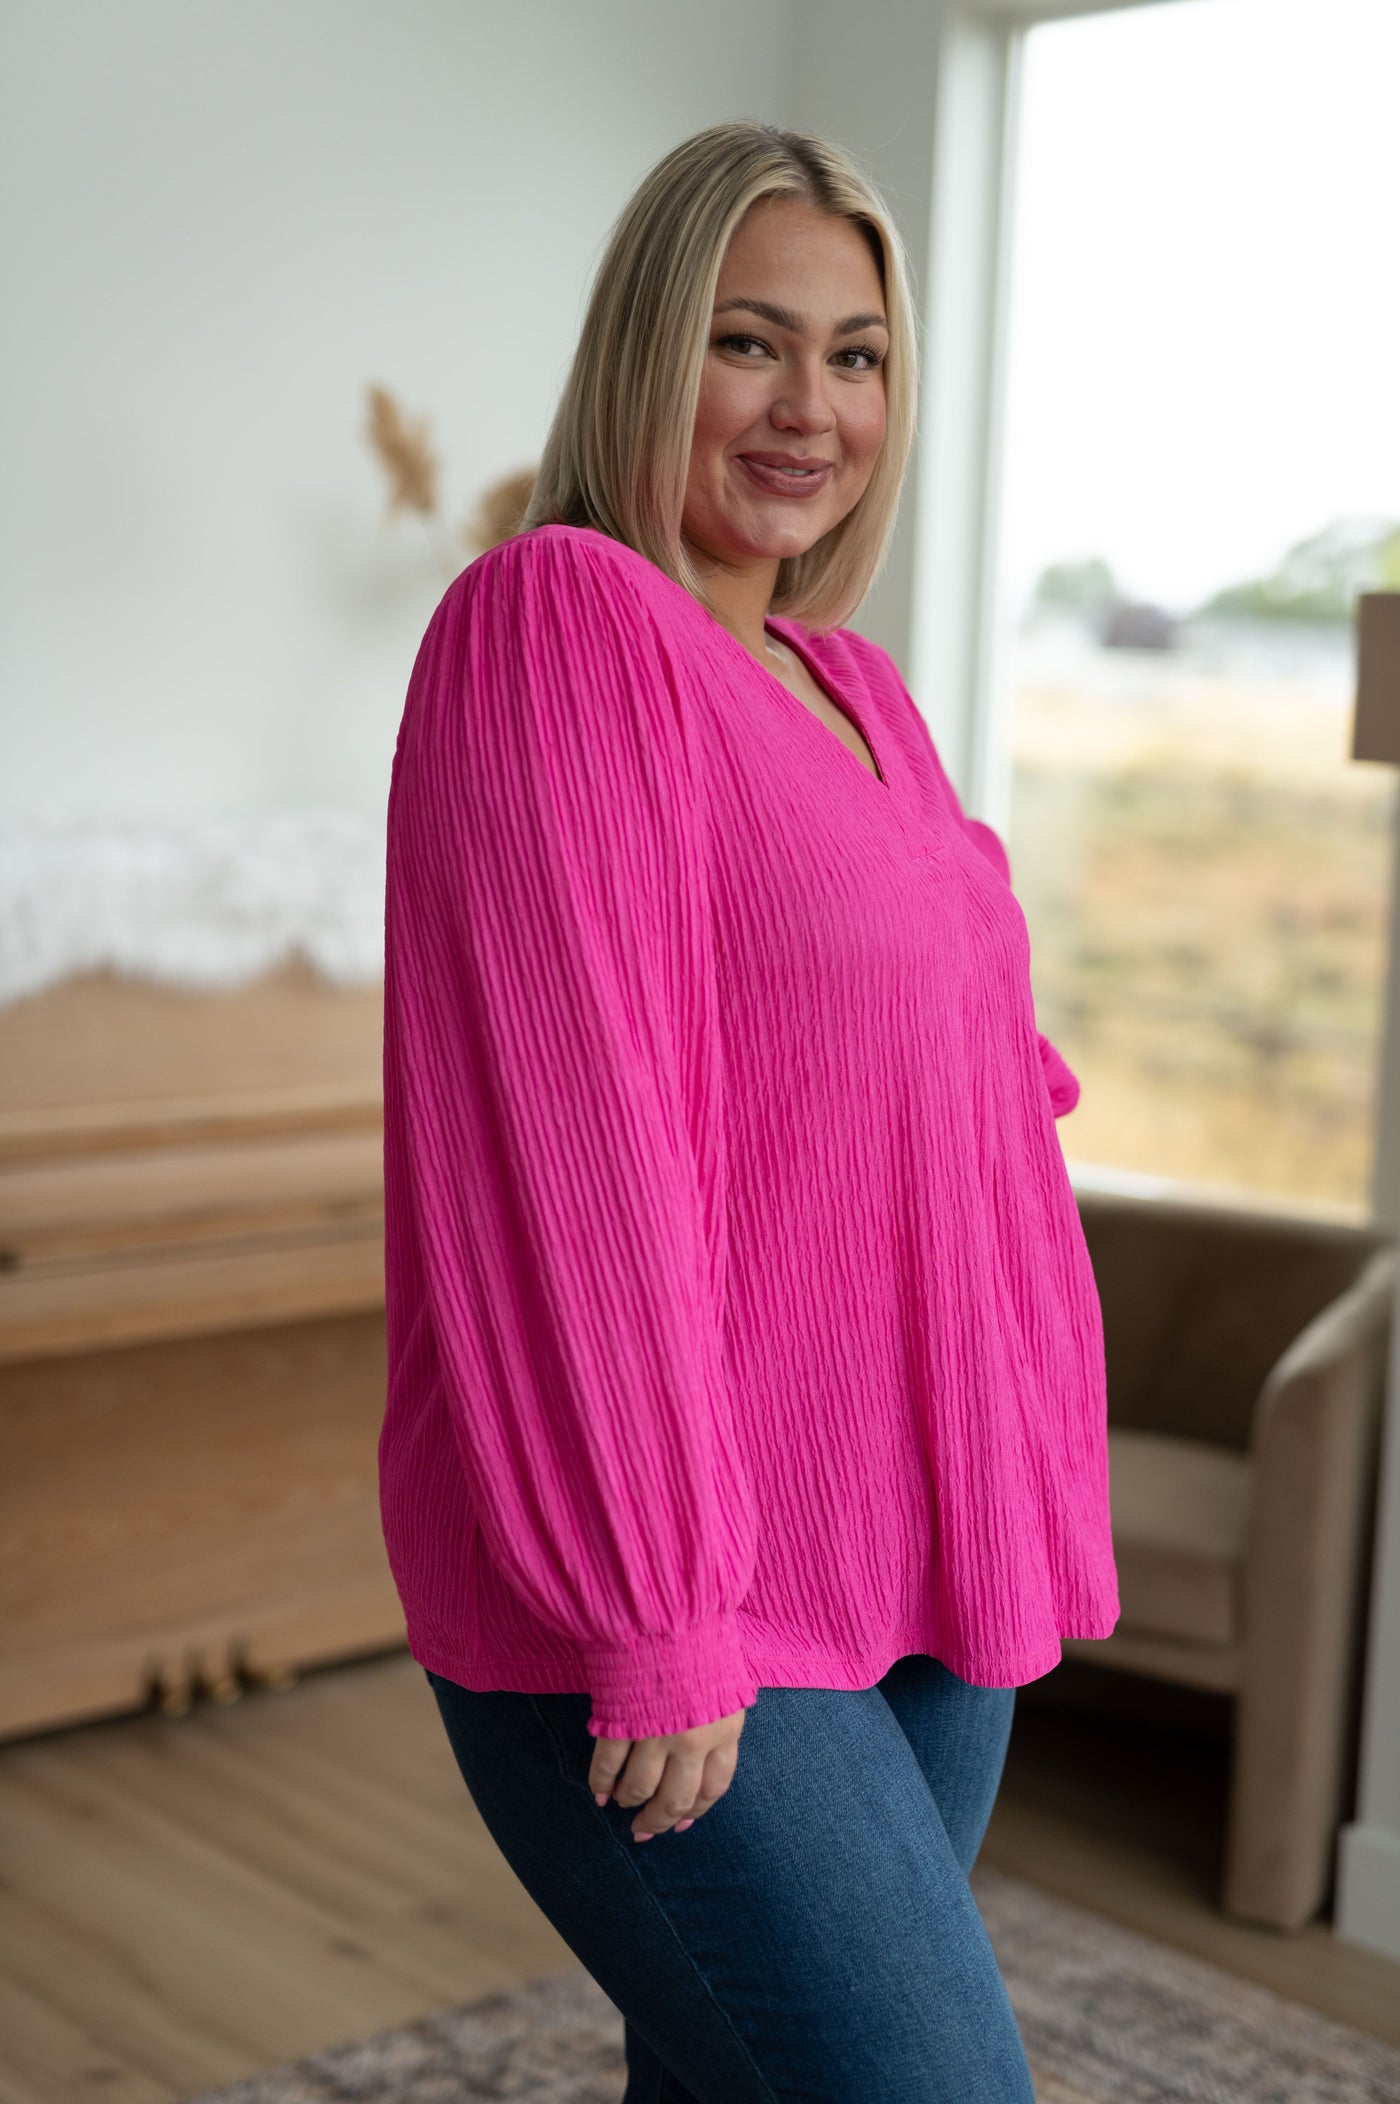 This Very Refined V-Neck Blouse is an effortless look to take you through the season. Crafted from textured fabric, it features a pleated v-neckline, balloon sleeves and smocked elastic cuffs for an easy, comfortable fit.